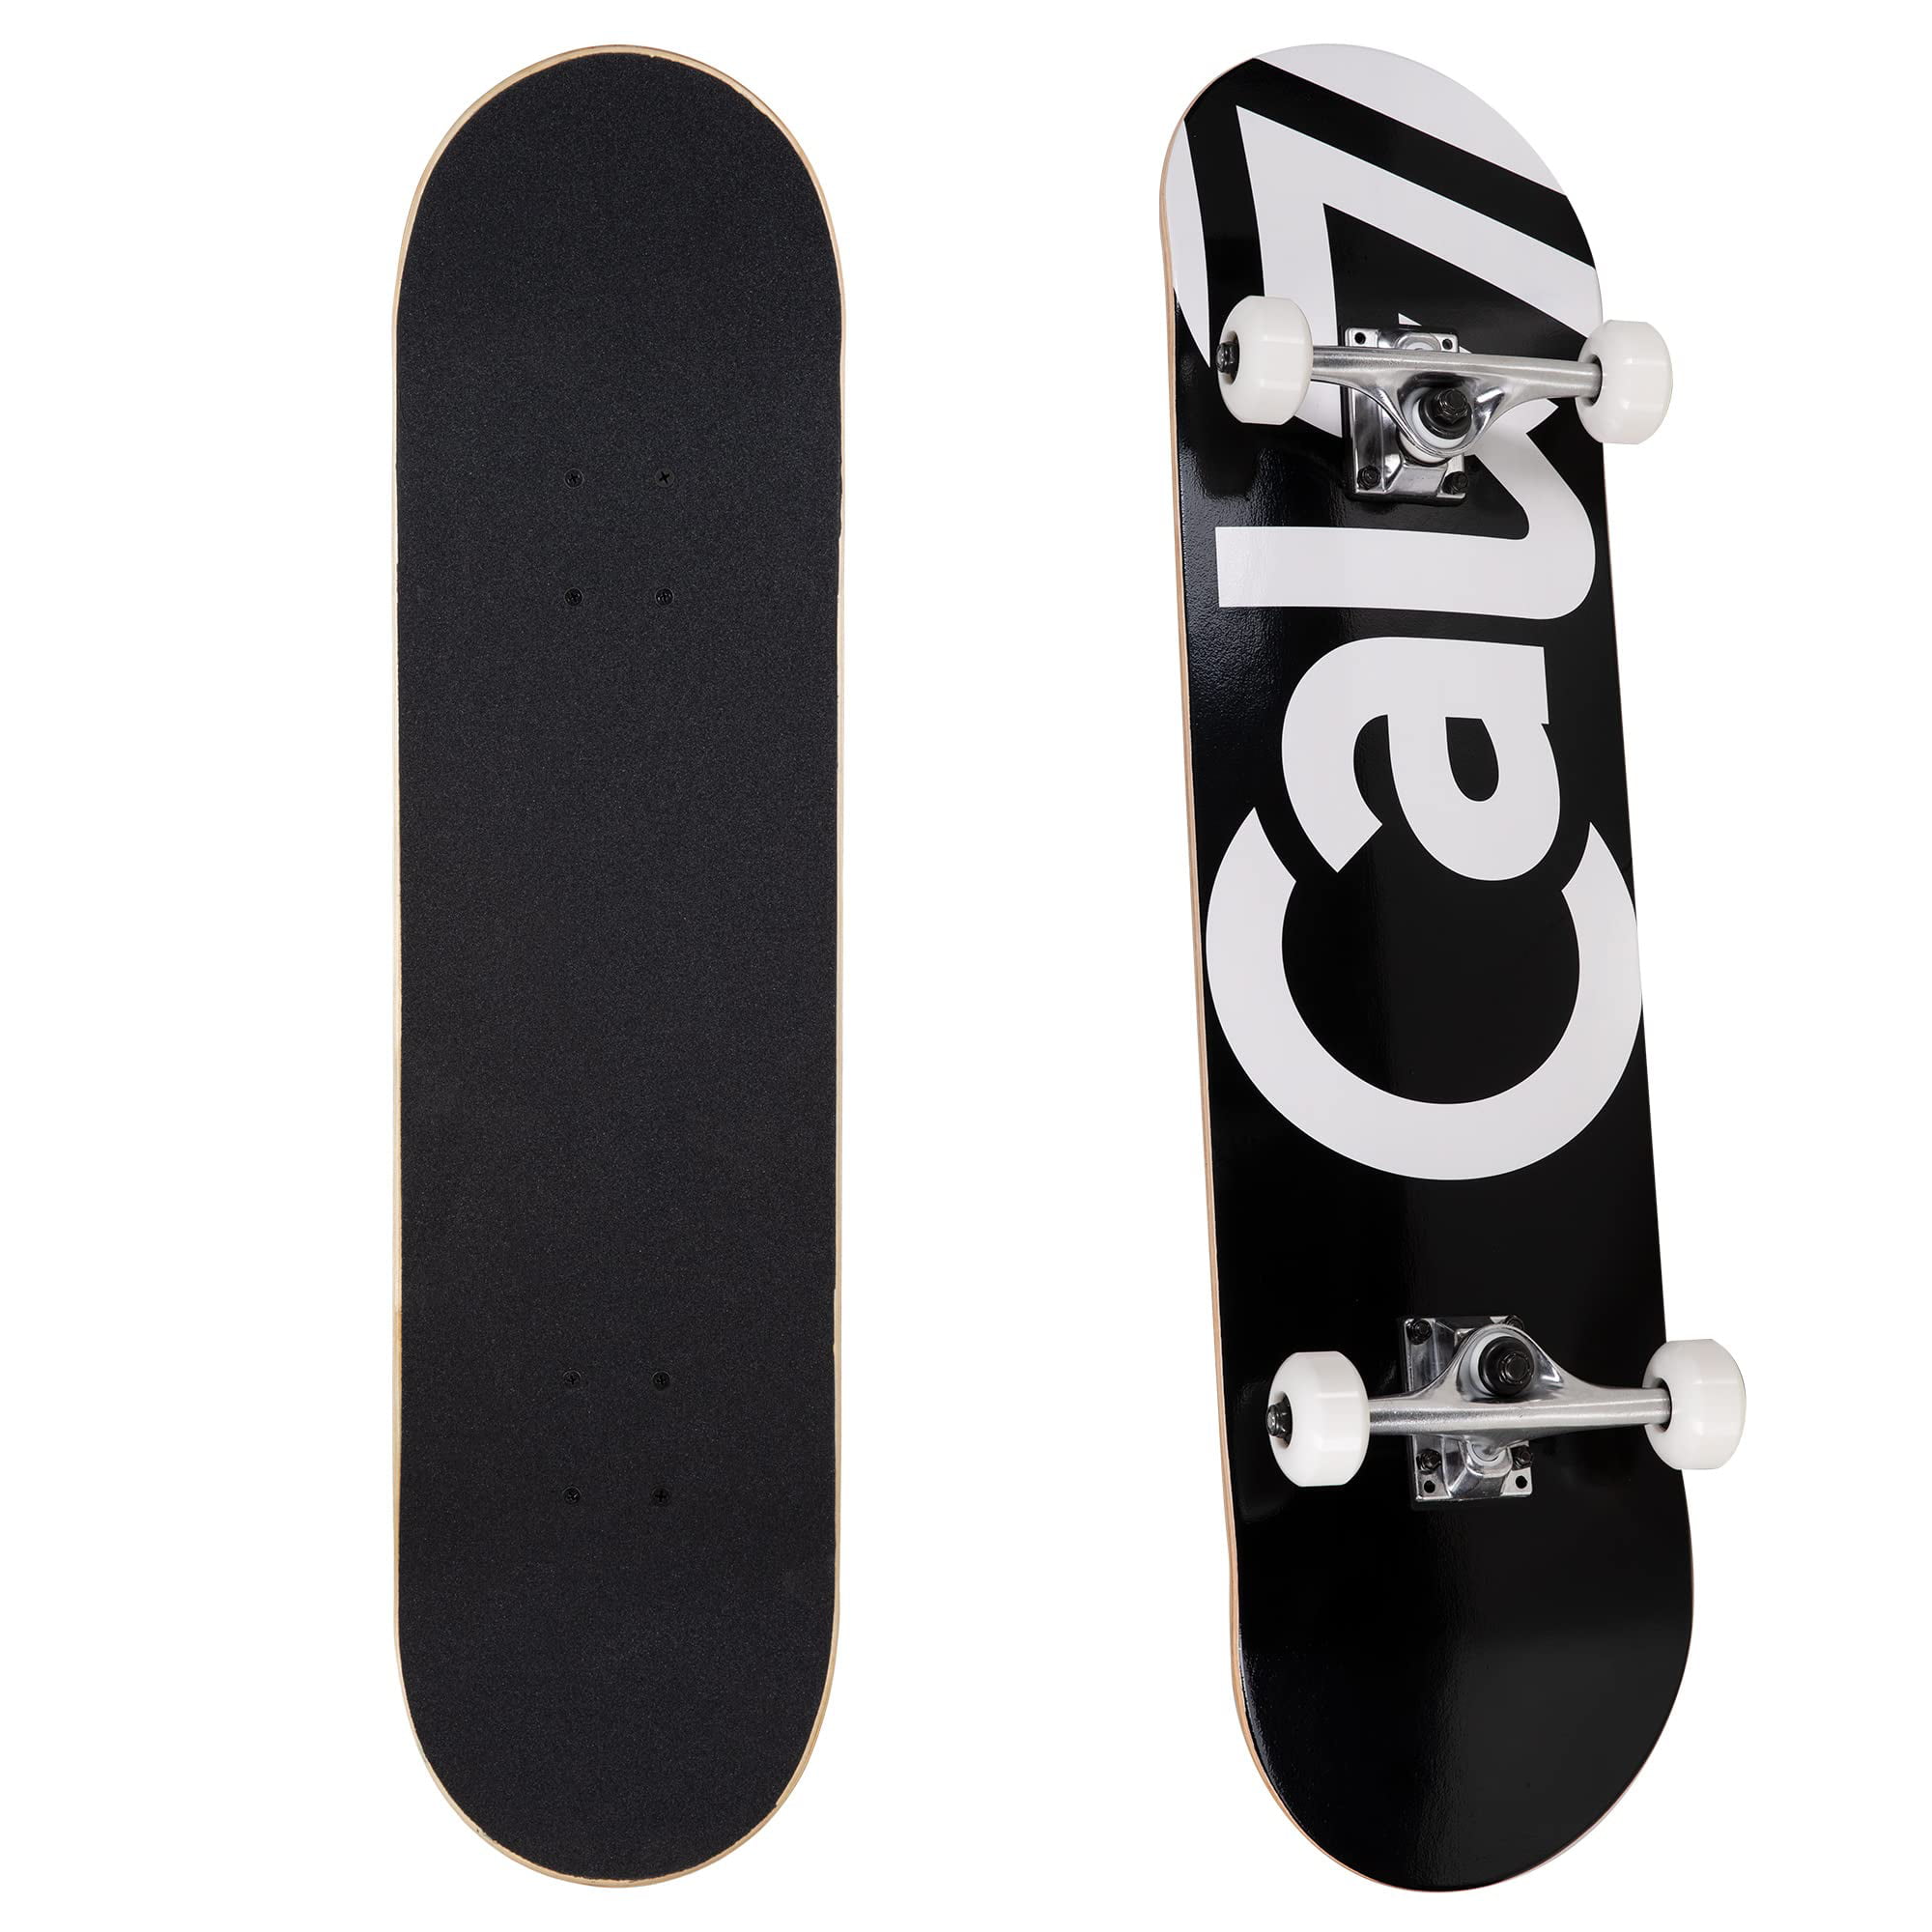 Cal 7 Complete 8.0 inch Skateboard, Gifts for Skateboarders (Black Tundra)